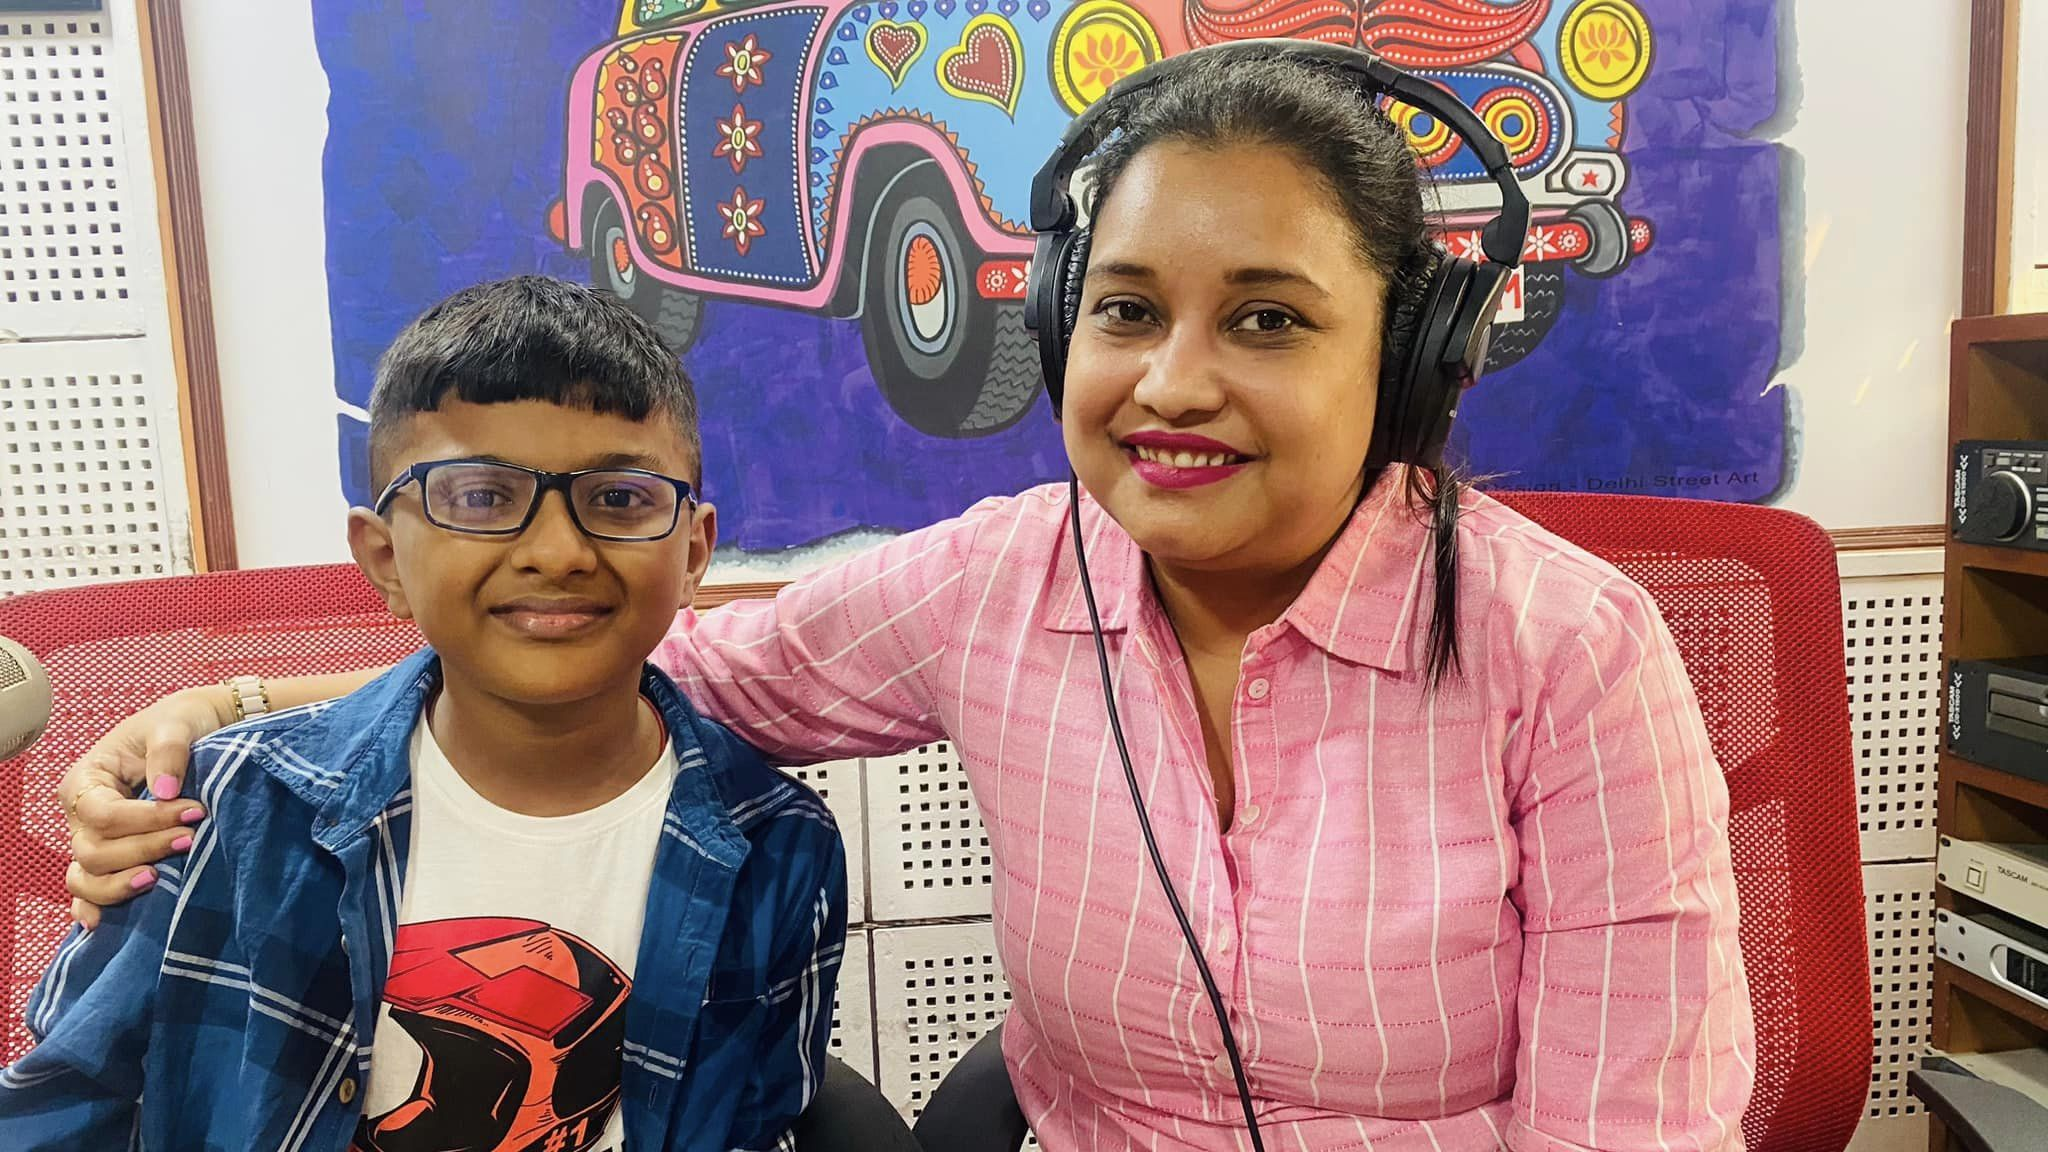 Rj Smita in conversation with Aahan Patnaik Sahoo, one of Odisha's youngest Writer and Youngest Published Author in India ,  on Red Fm Morning No1.